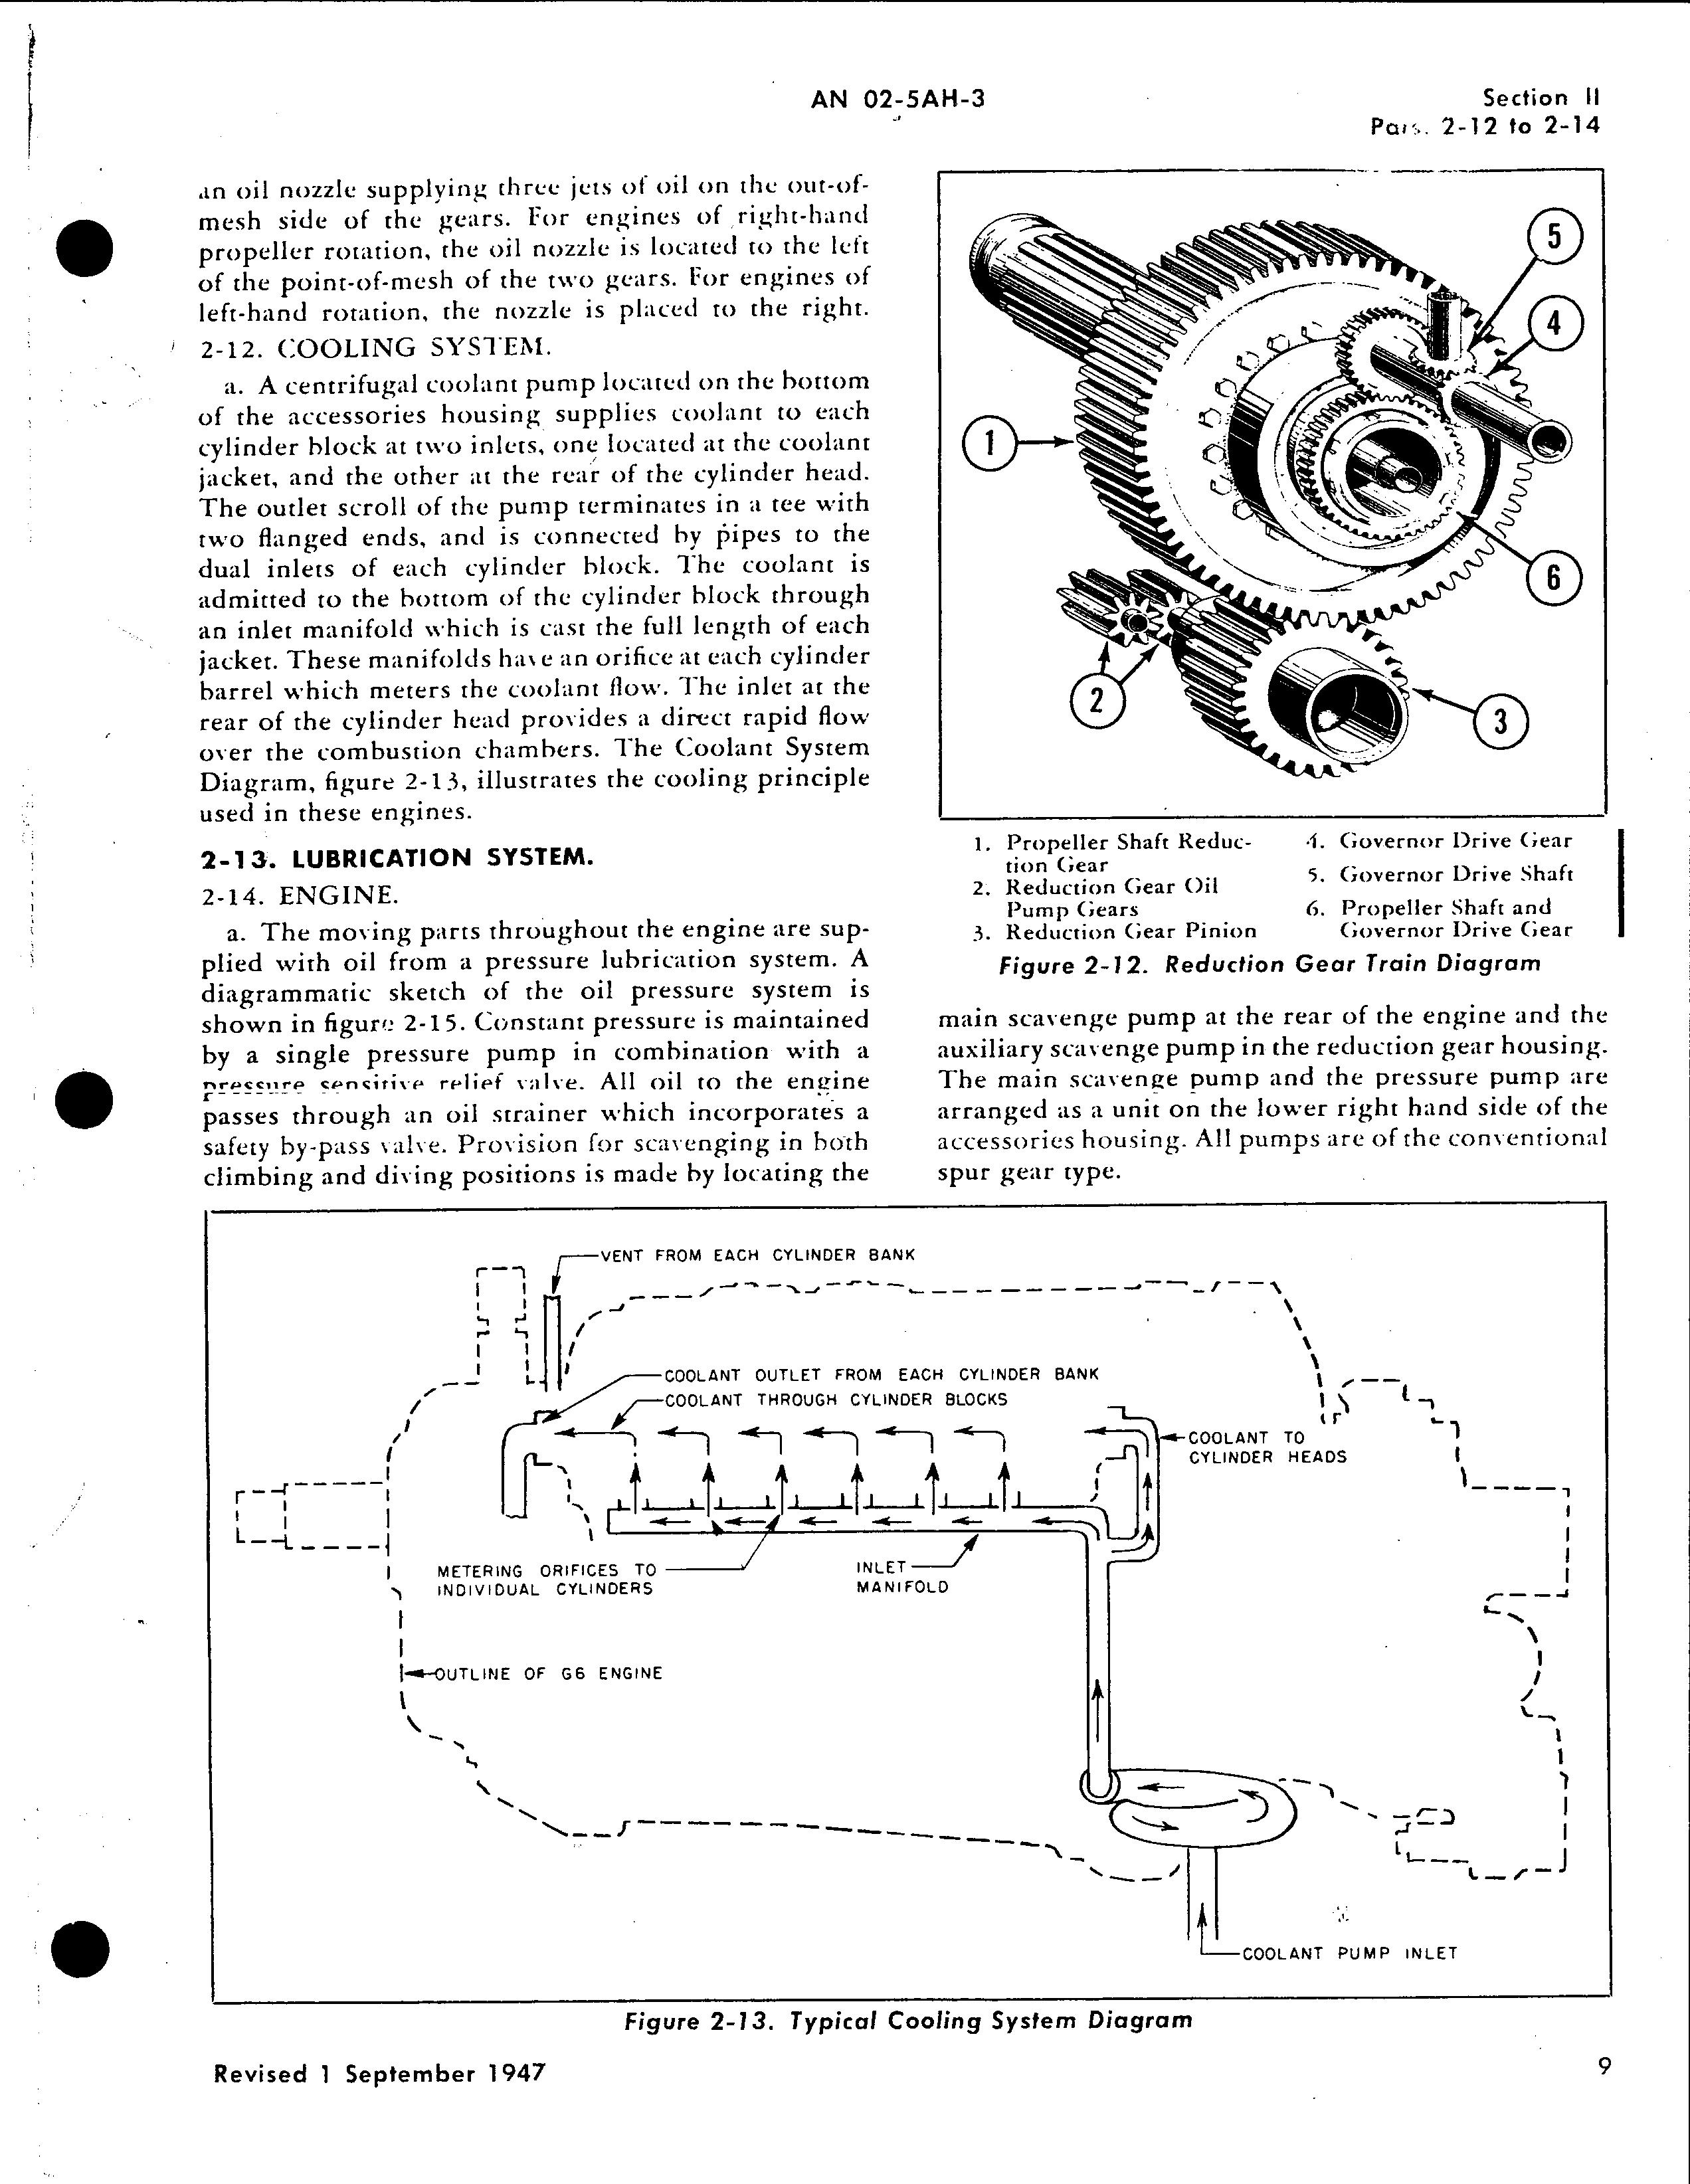 Sample page 15 from AirCorps Library document: Overhaul Instructions for Models V-1710-143 and -145 Aircraft Engines